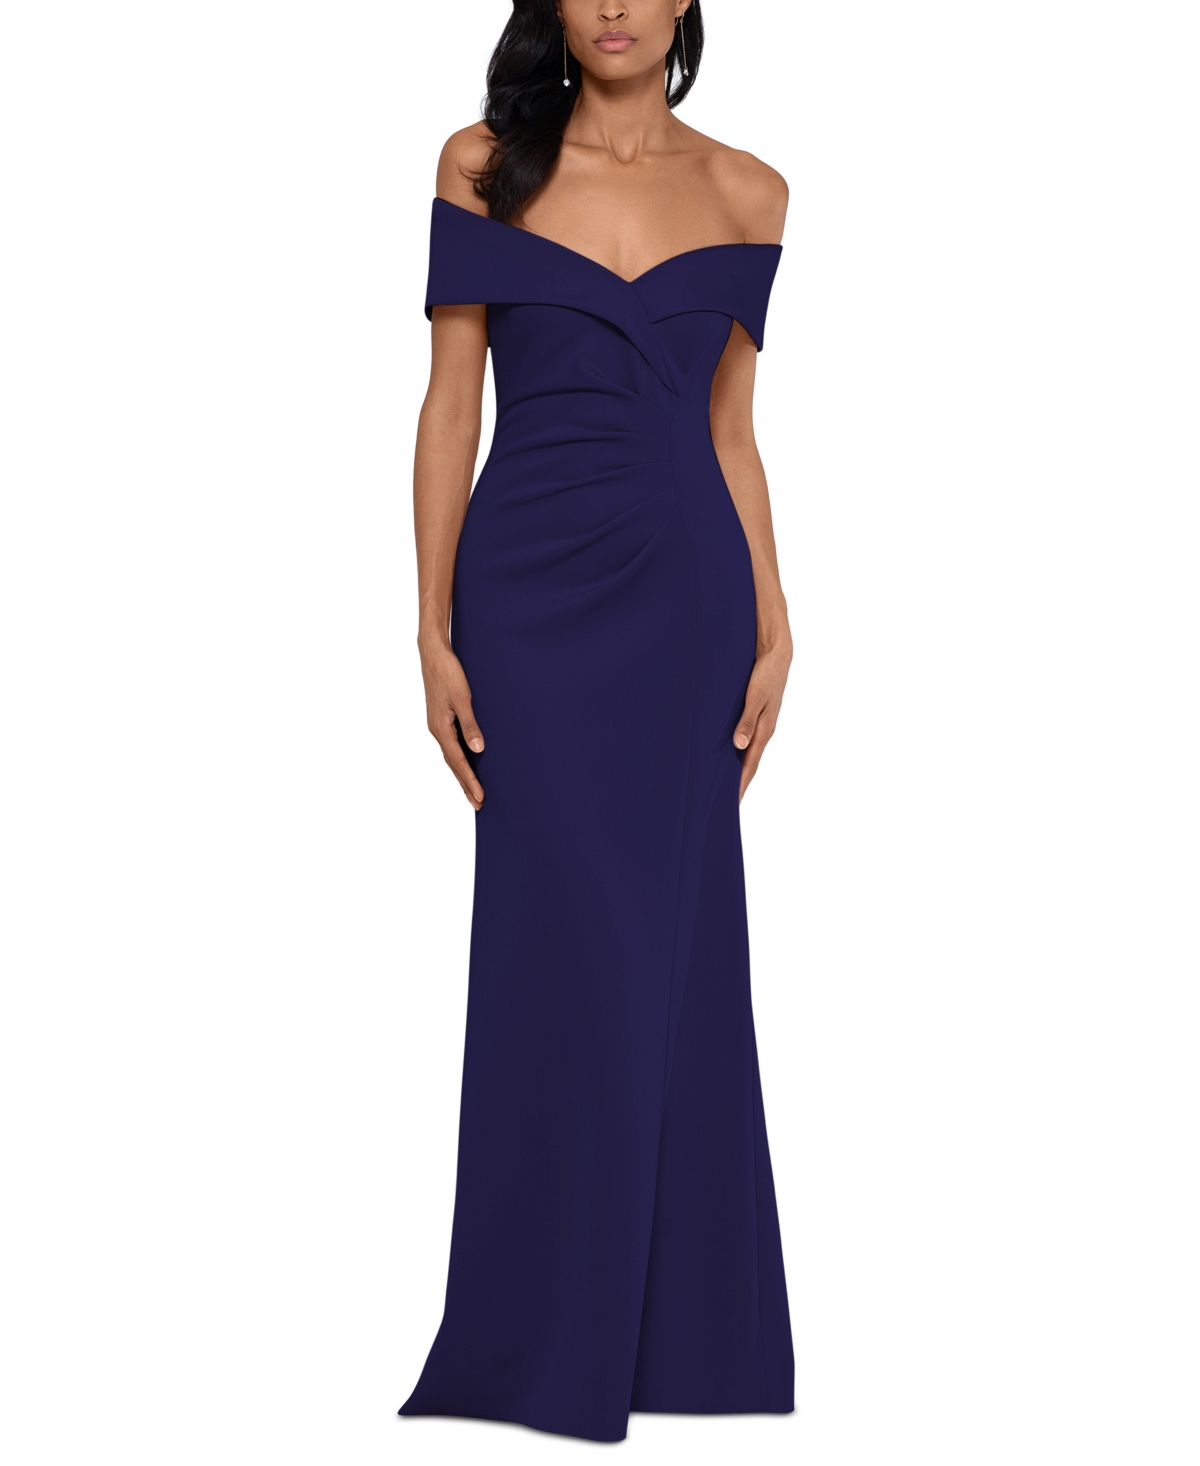 Off-The-Shoulder Ruched Gown - Navy Blue